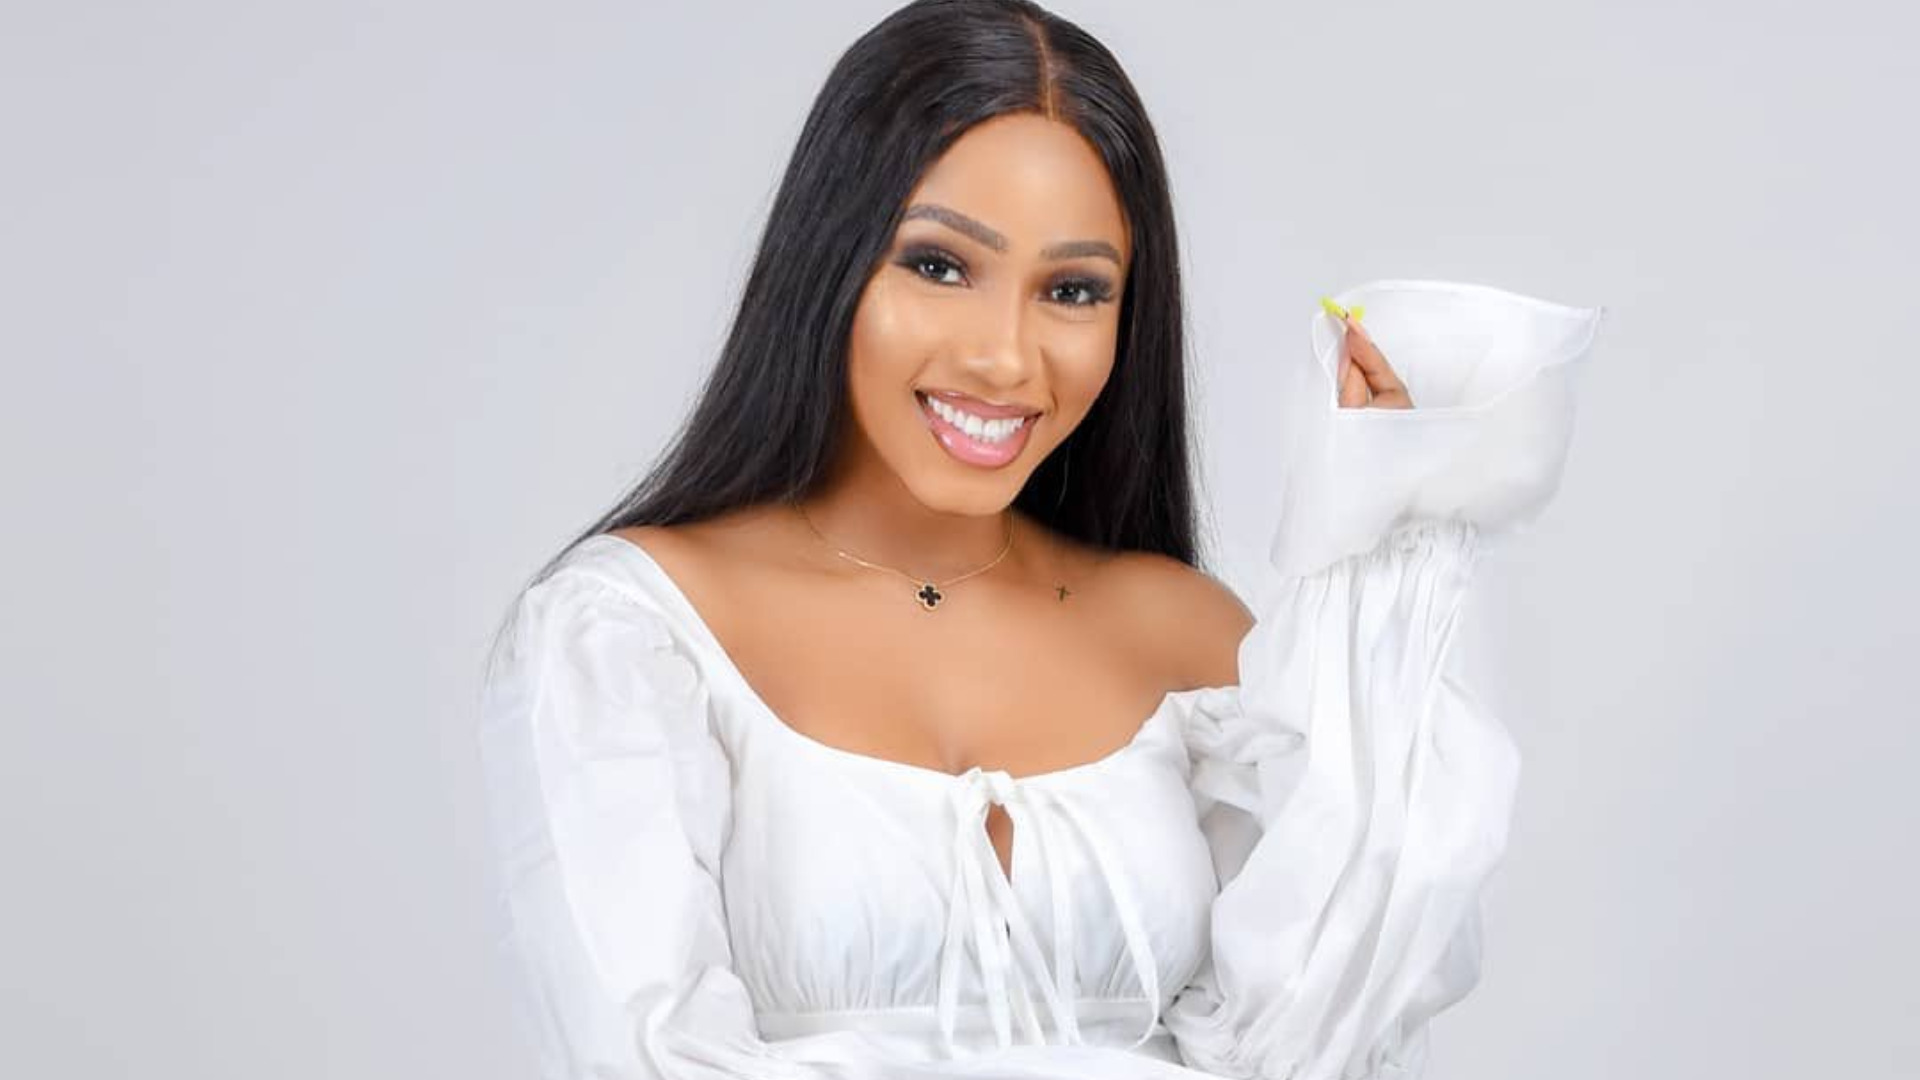 BBnaija Star, Mercy Eke Offers N5M Grant To Struggling Businesses Owners As She Announces Her Foundation